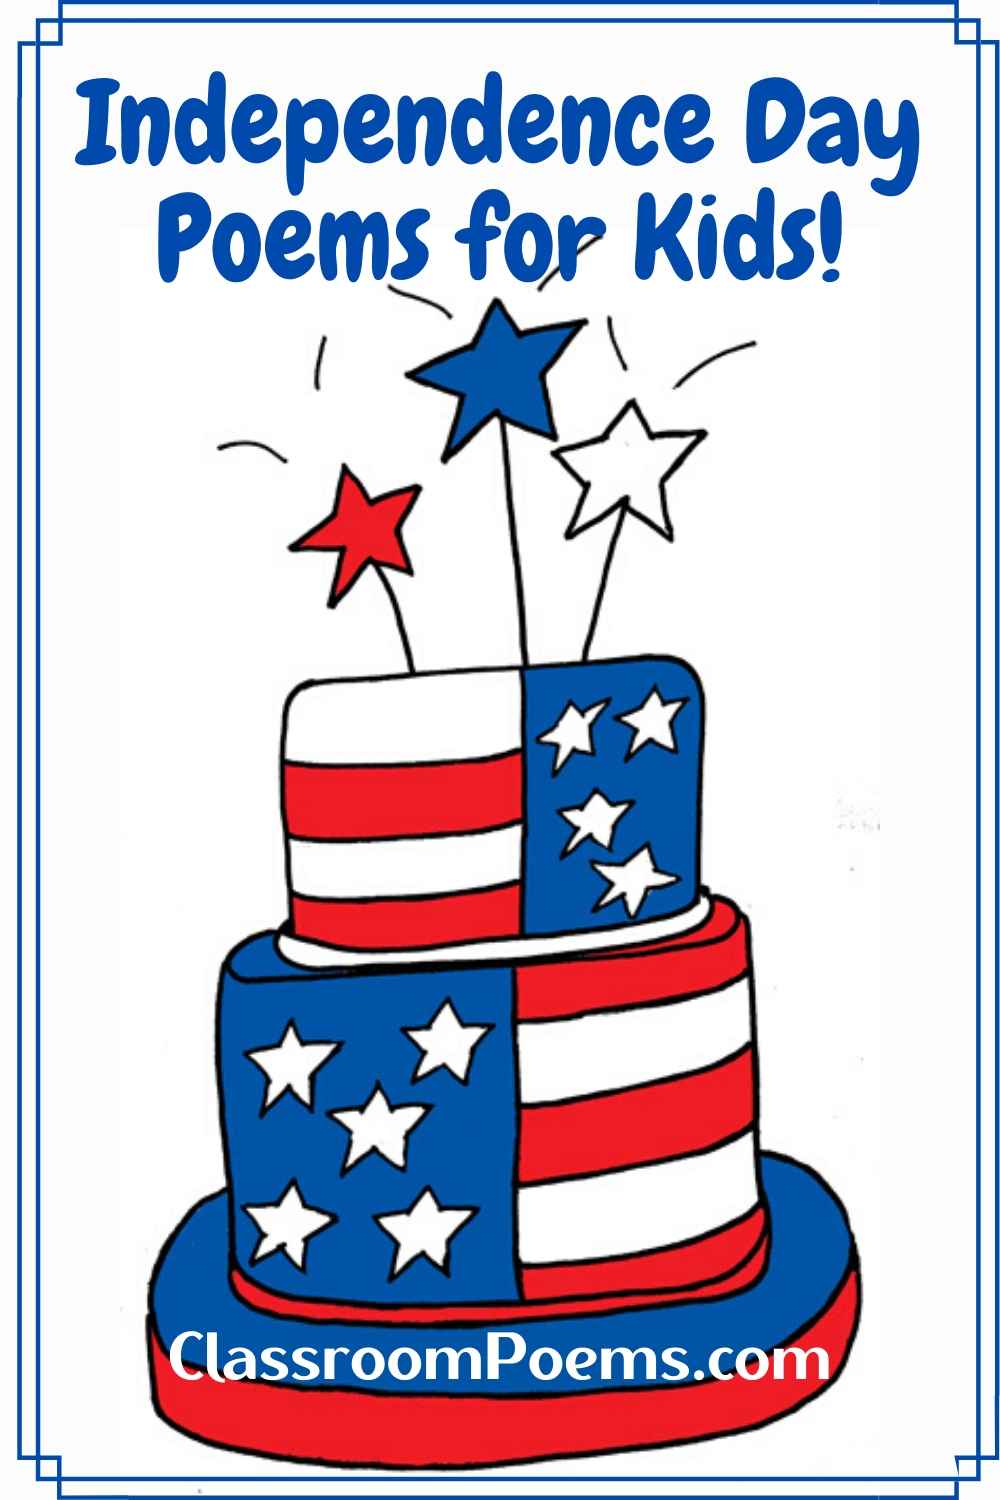 Independence Day poems. 4th of July poems for kids.